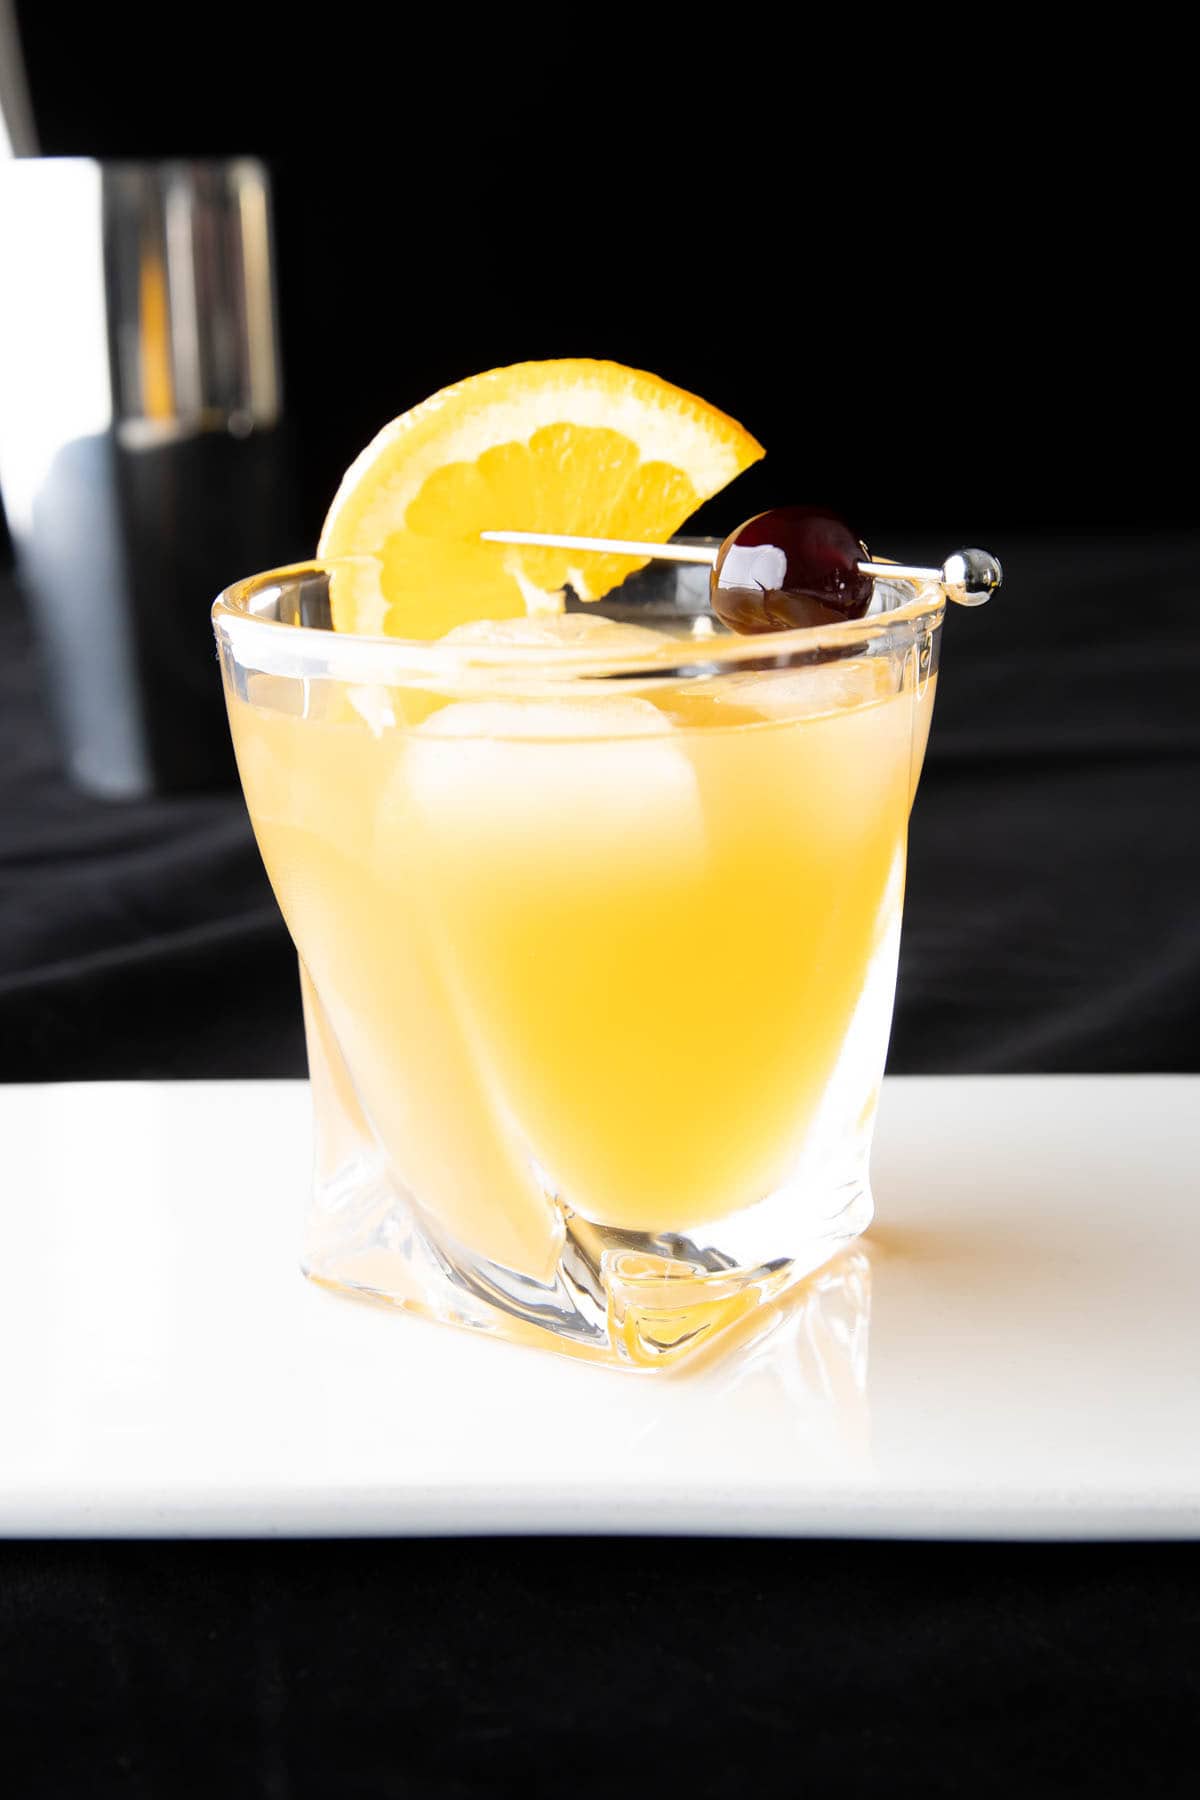 Whiskey Sour served on the rocks in an old-fashioned glass